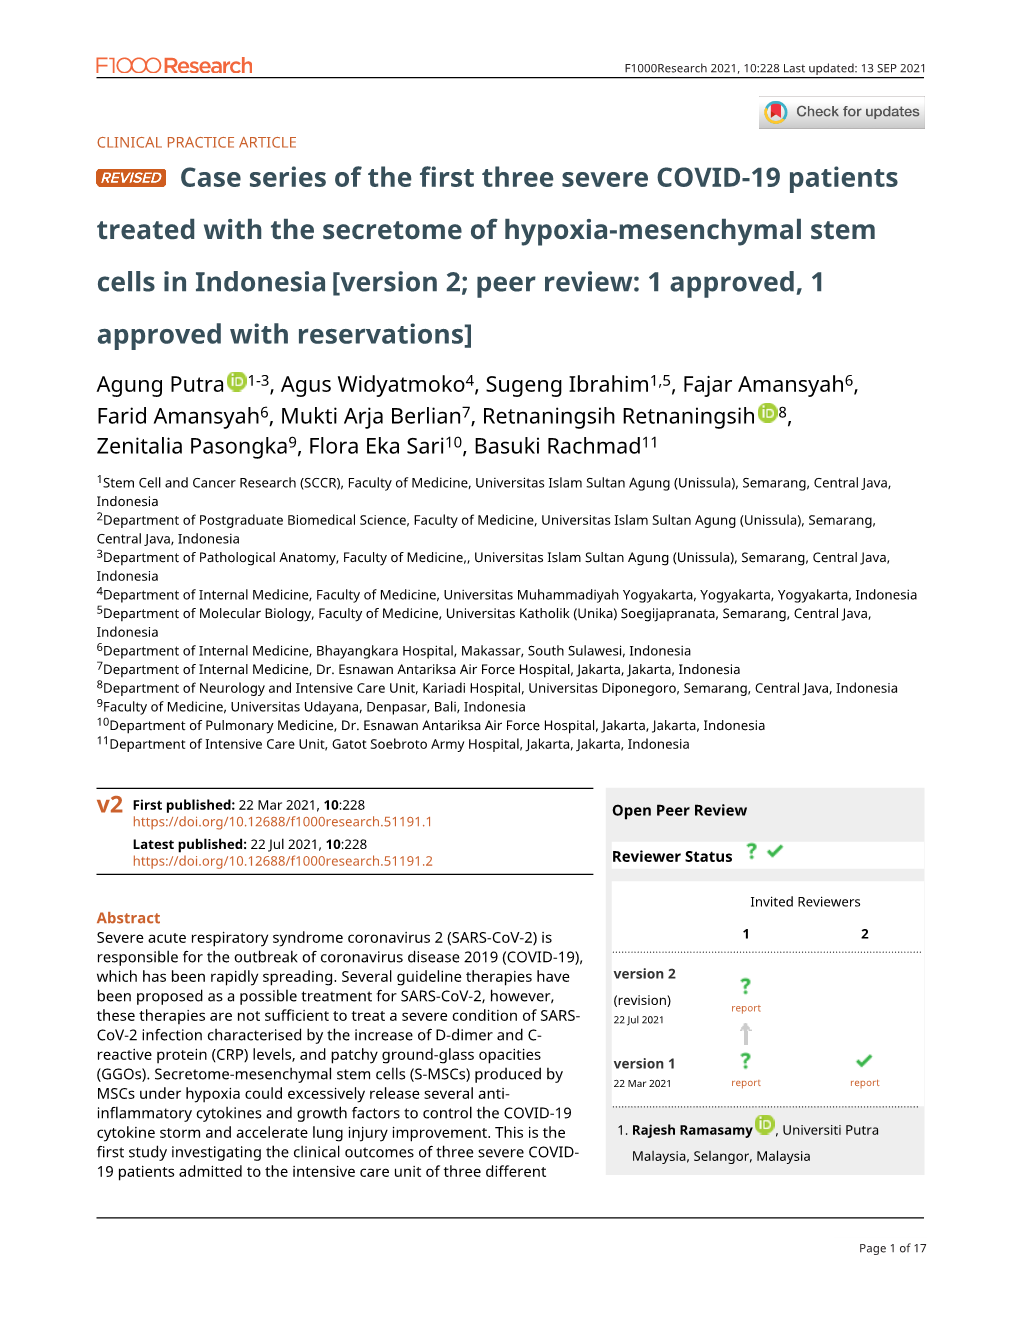 Case Series of the First Three Severe COVID-19 Patients Treated with The